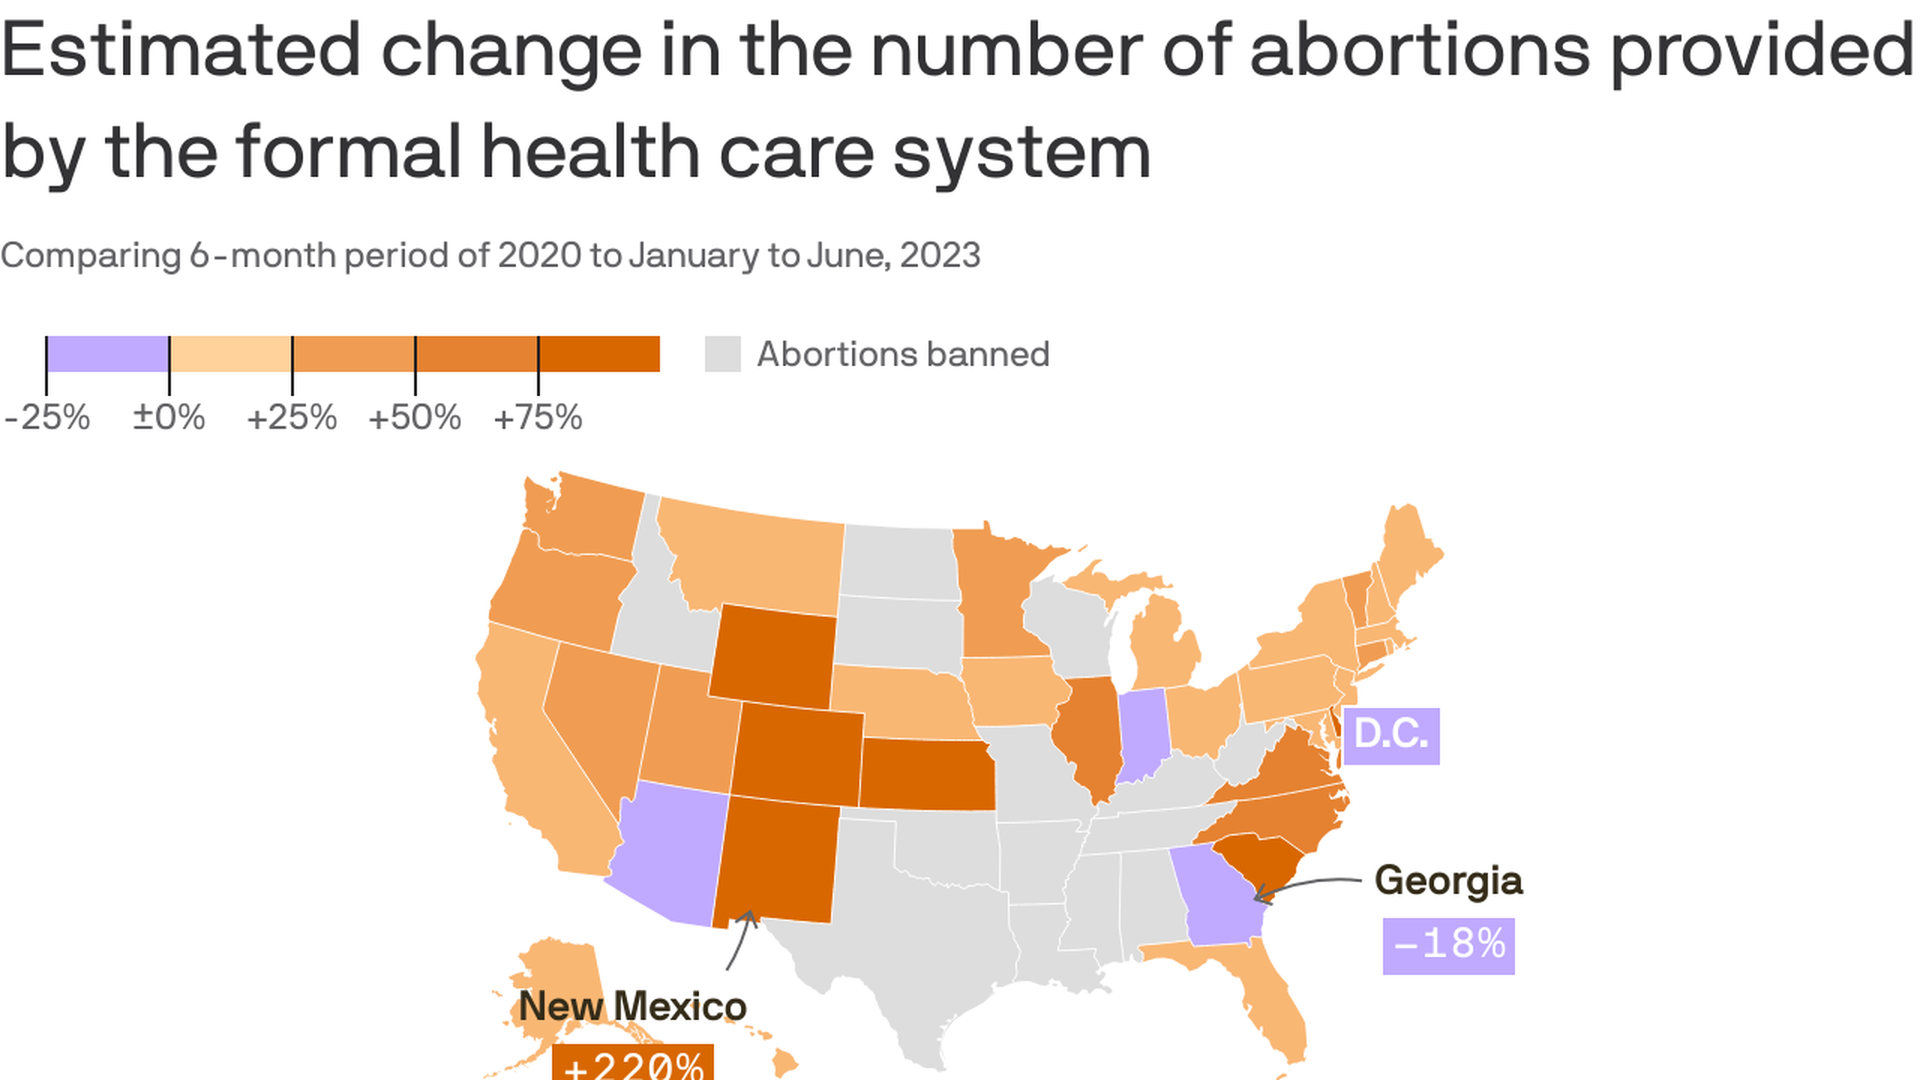 A map of the United States showing the estimated change in the number of abortions provided by the formal health care system comparing 6-month period of 2020 to January to June, 2023. Four states have seen increases of more than 100%, including New Mexico with change of +220% and Wyoming with 202%.